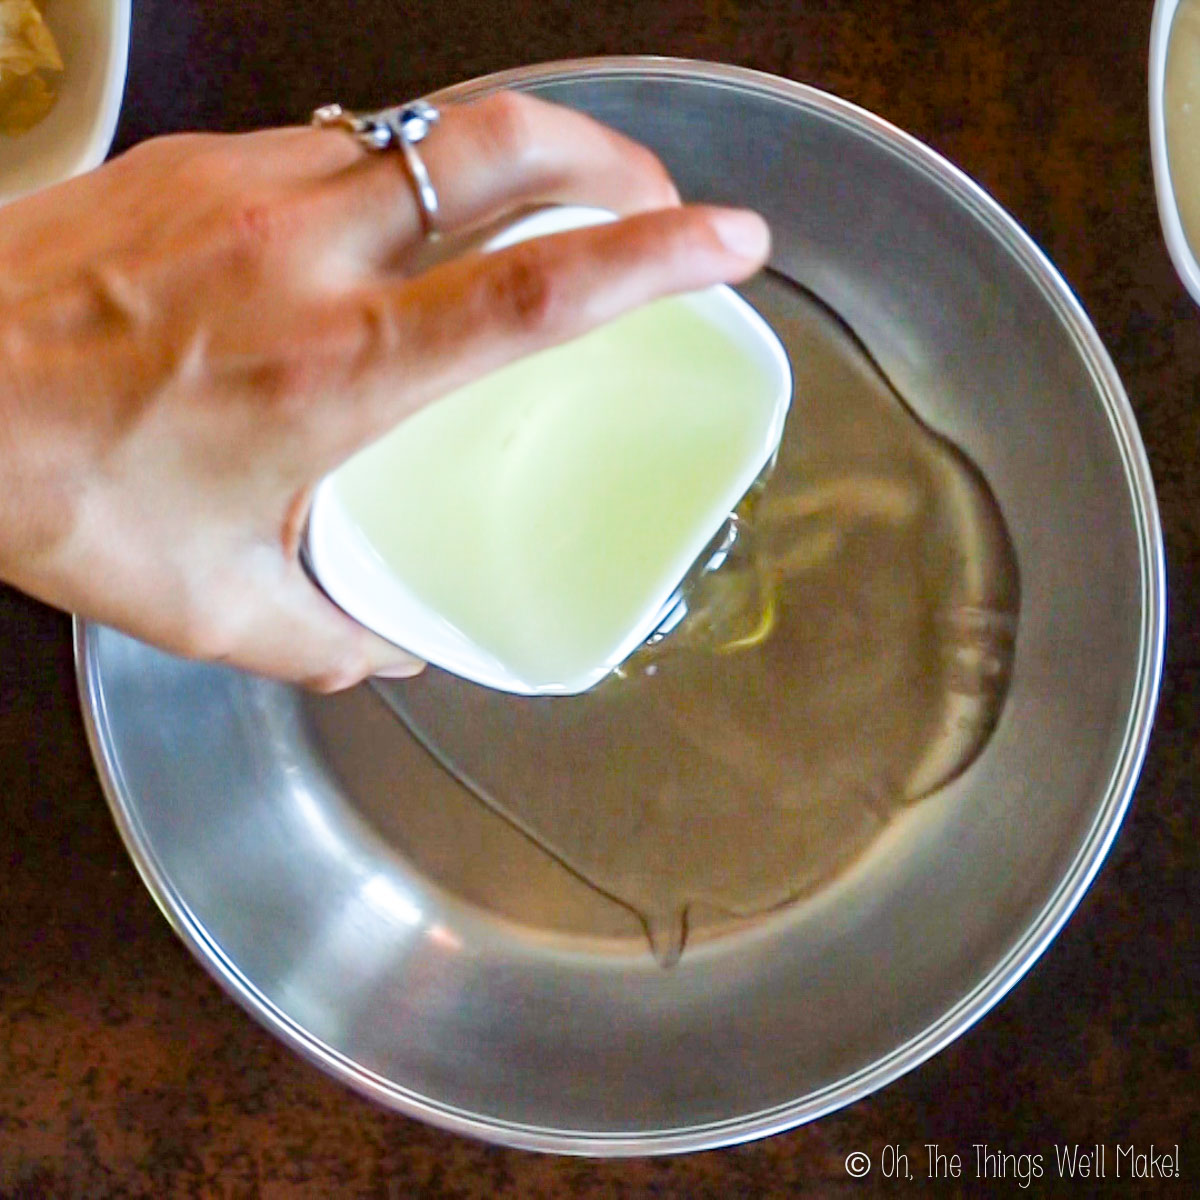 Pouring coconut oil into a stainless steel bowl